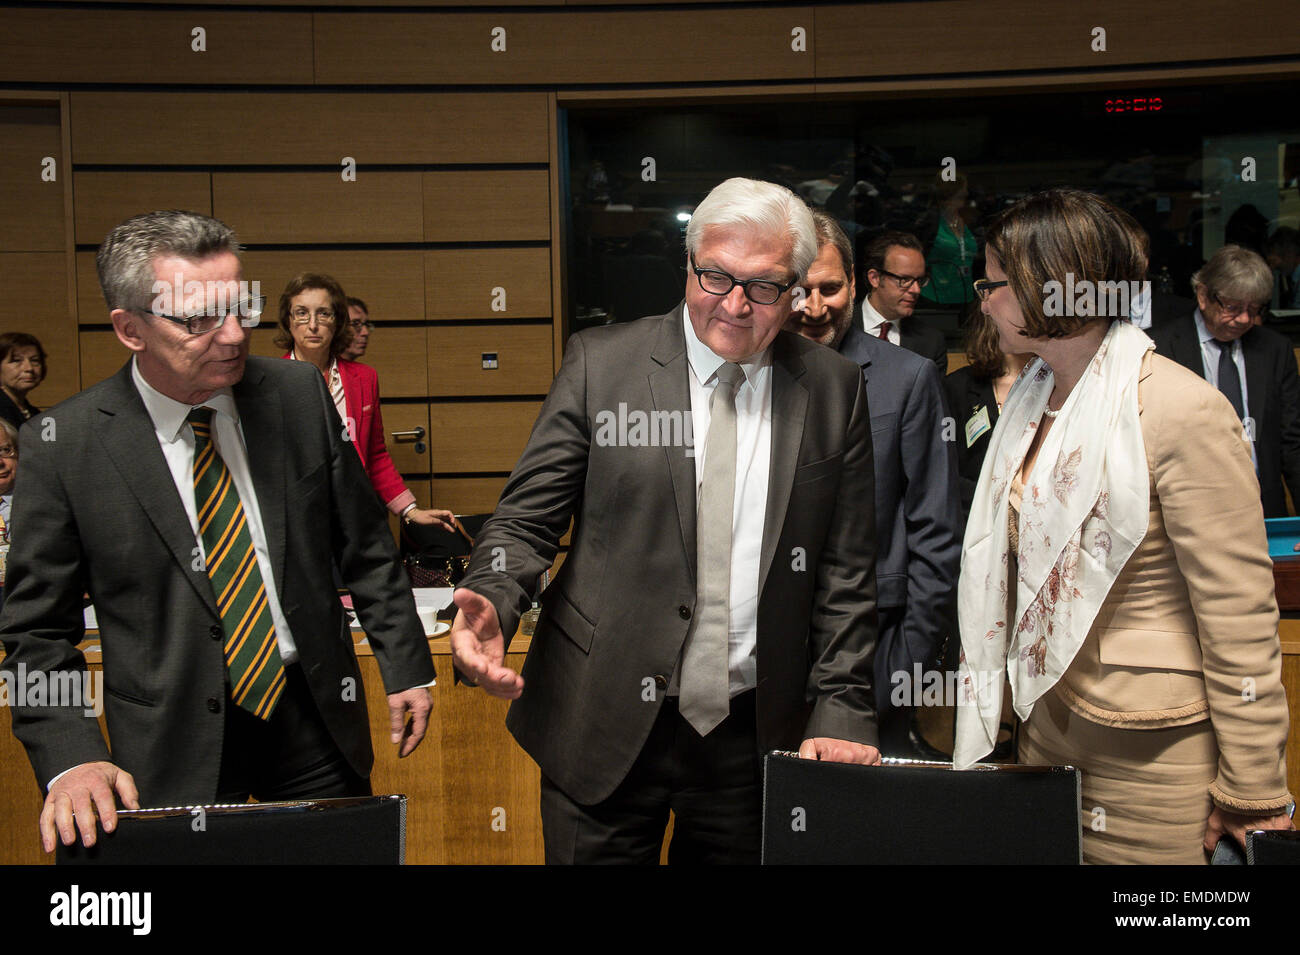 (L-R) German Interior Minister Thomas de Maiziere, German Foreign Minister Frank-Walter Steinmeier and Austrian Interior Minister Johanna Mikl-Leitner prior to the EU Foreign Ministers Council (FAC) at European Council headquarters in Luxembourg on 20.04.2015 . The European Union ministers of Foreign Affairs hold urgent talks in a bid to halt the rising death toll of refugees in the Mediterranean Sea./picture alliance Stock Photo